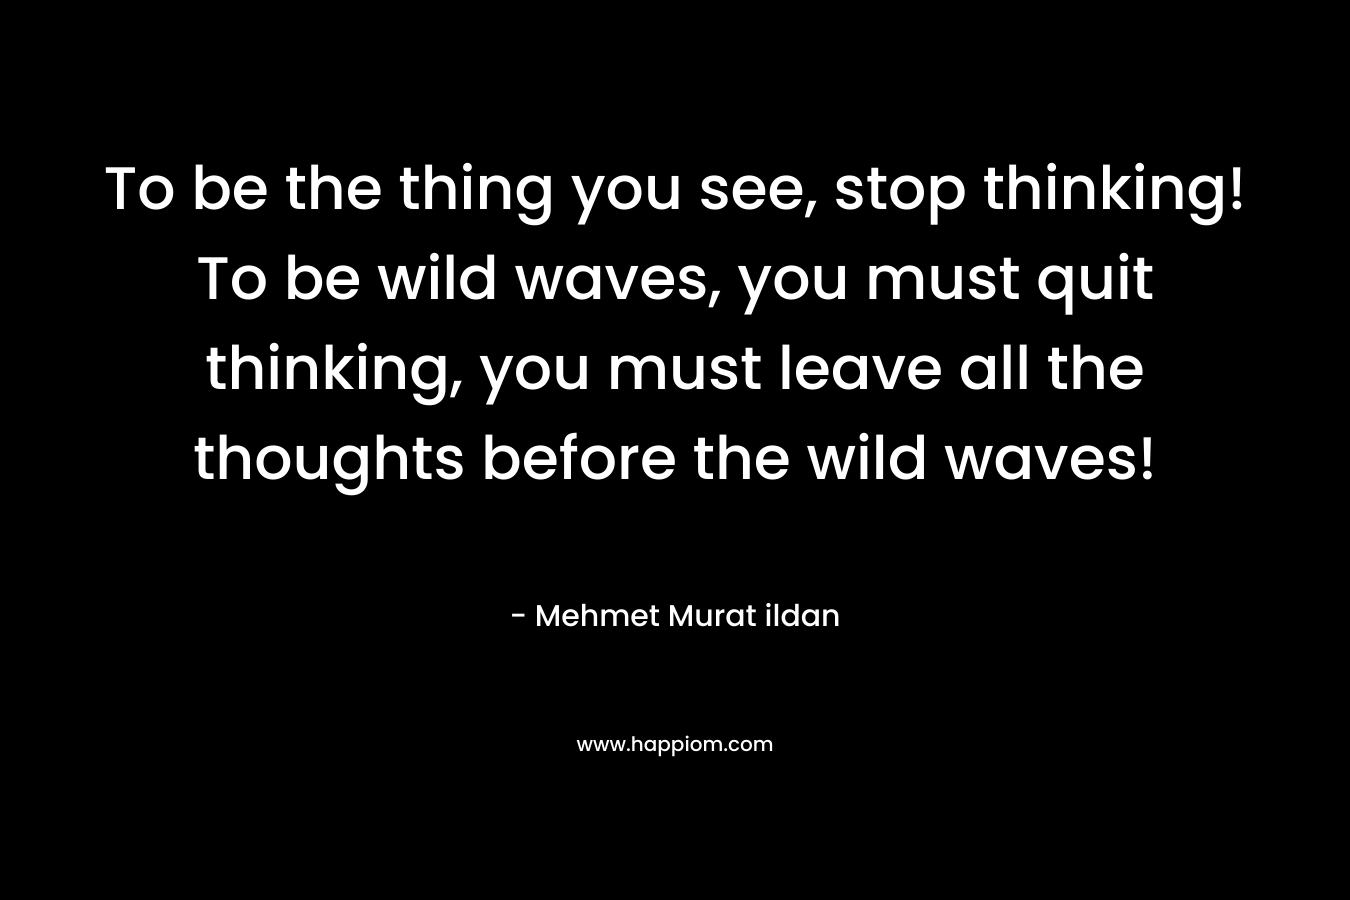 To be the thing you see, stop thinking! To be wild waves, you must quit thinking, you must leave all the thoughts before the wild waves!